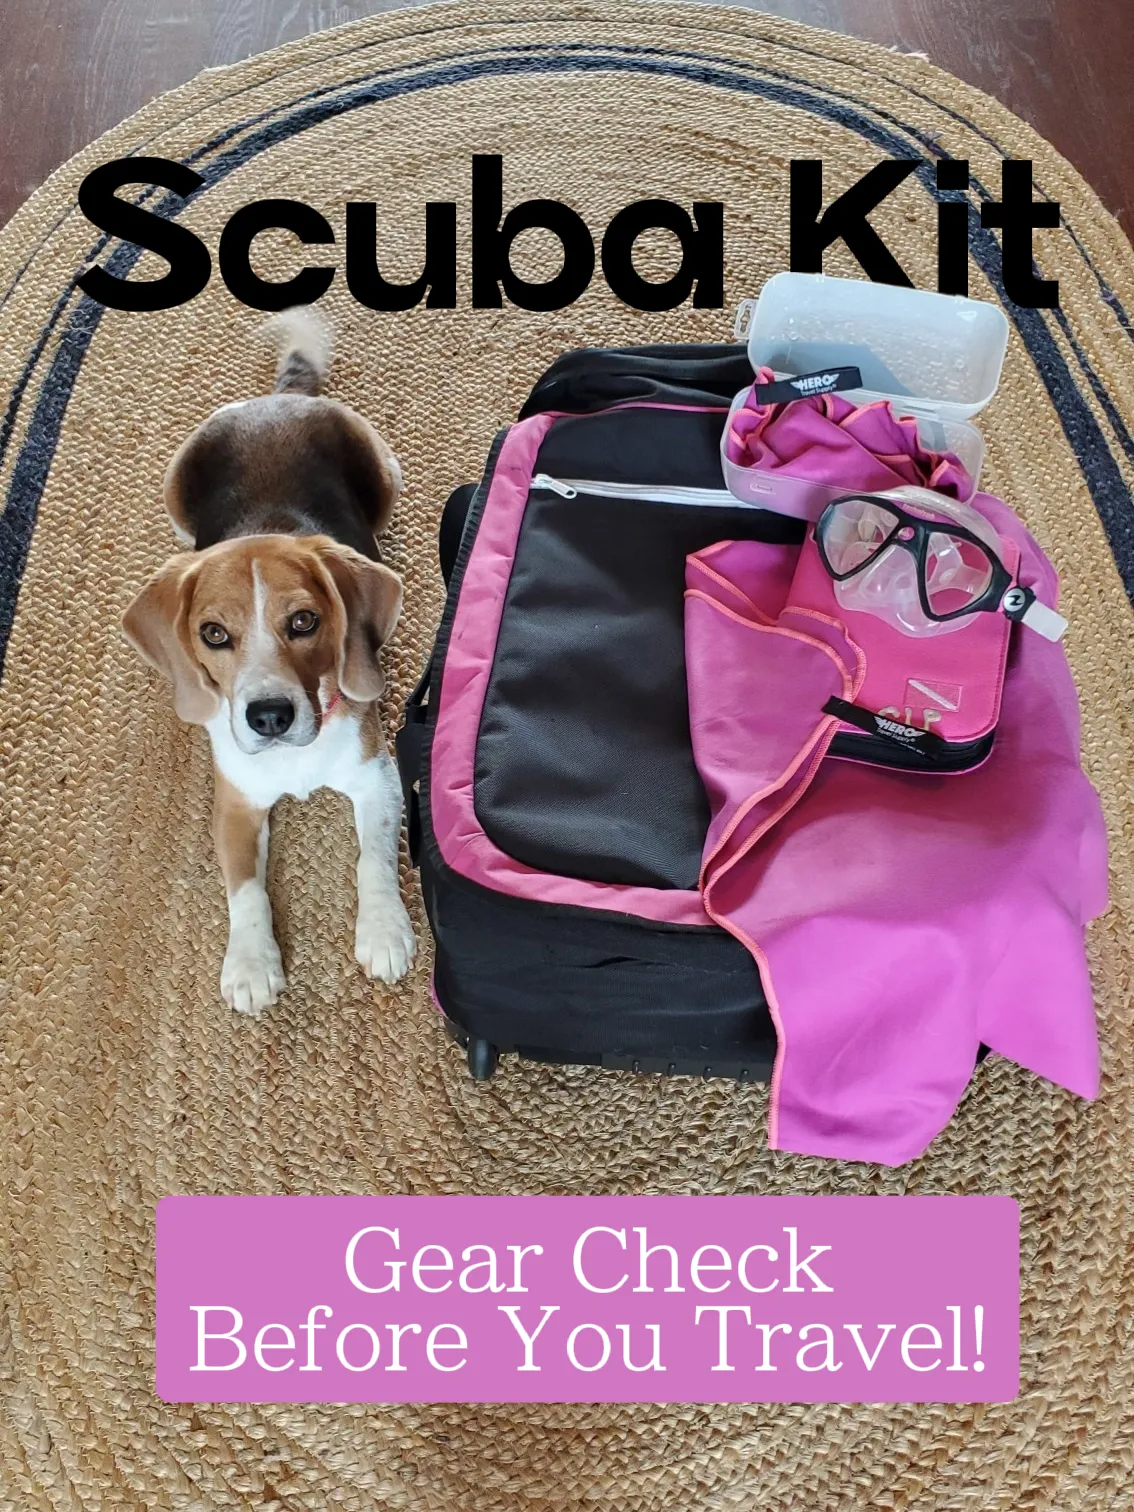 Get Ready To Scuba!'s images